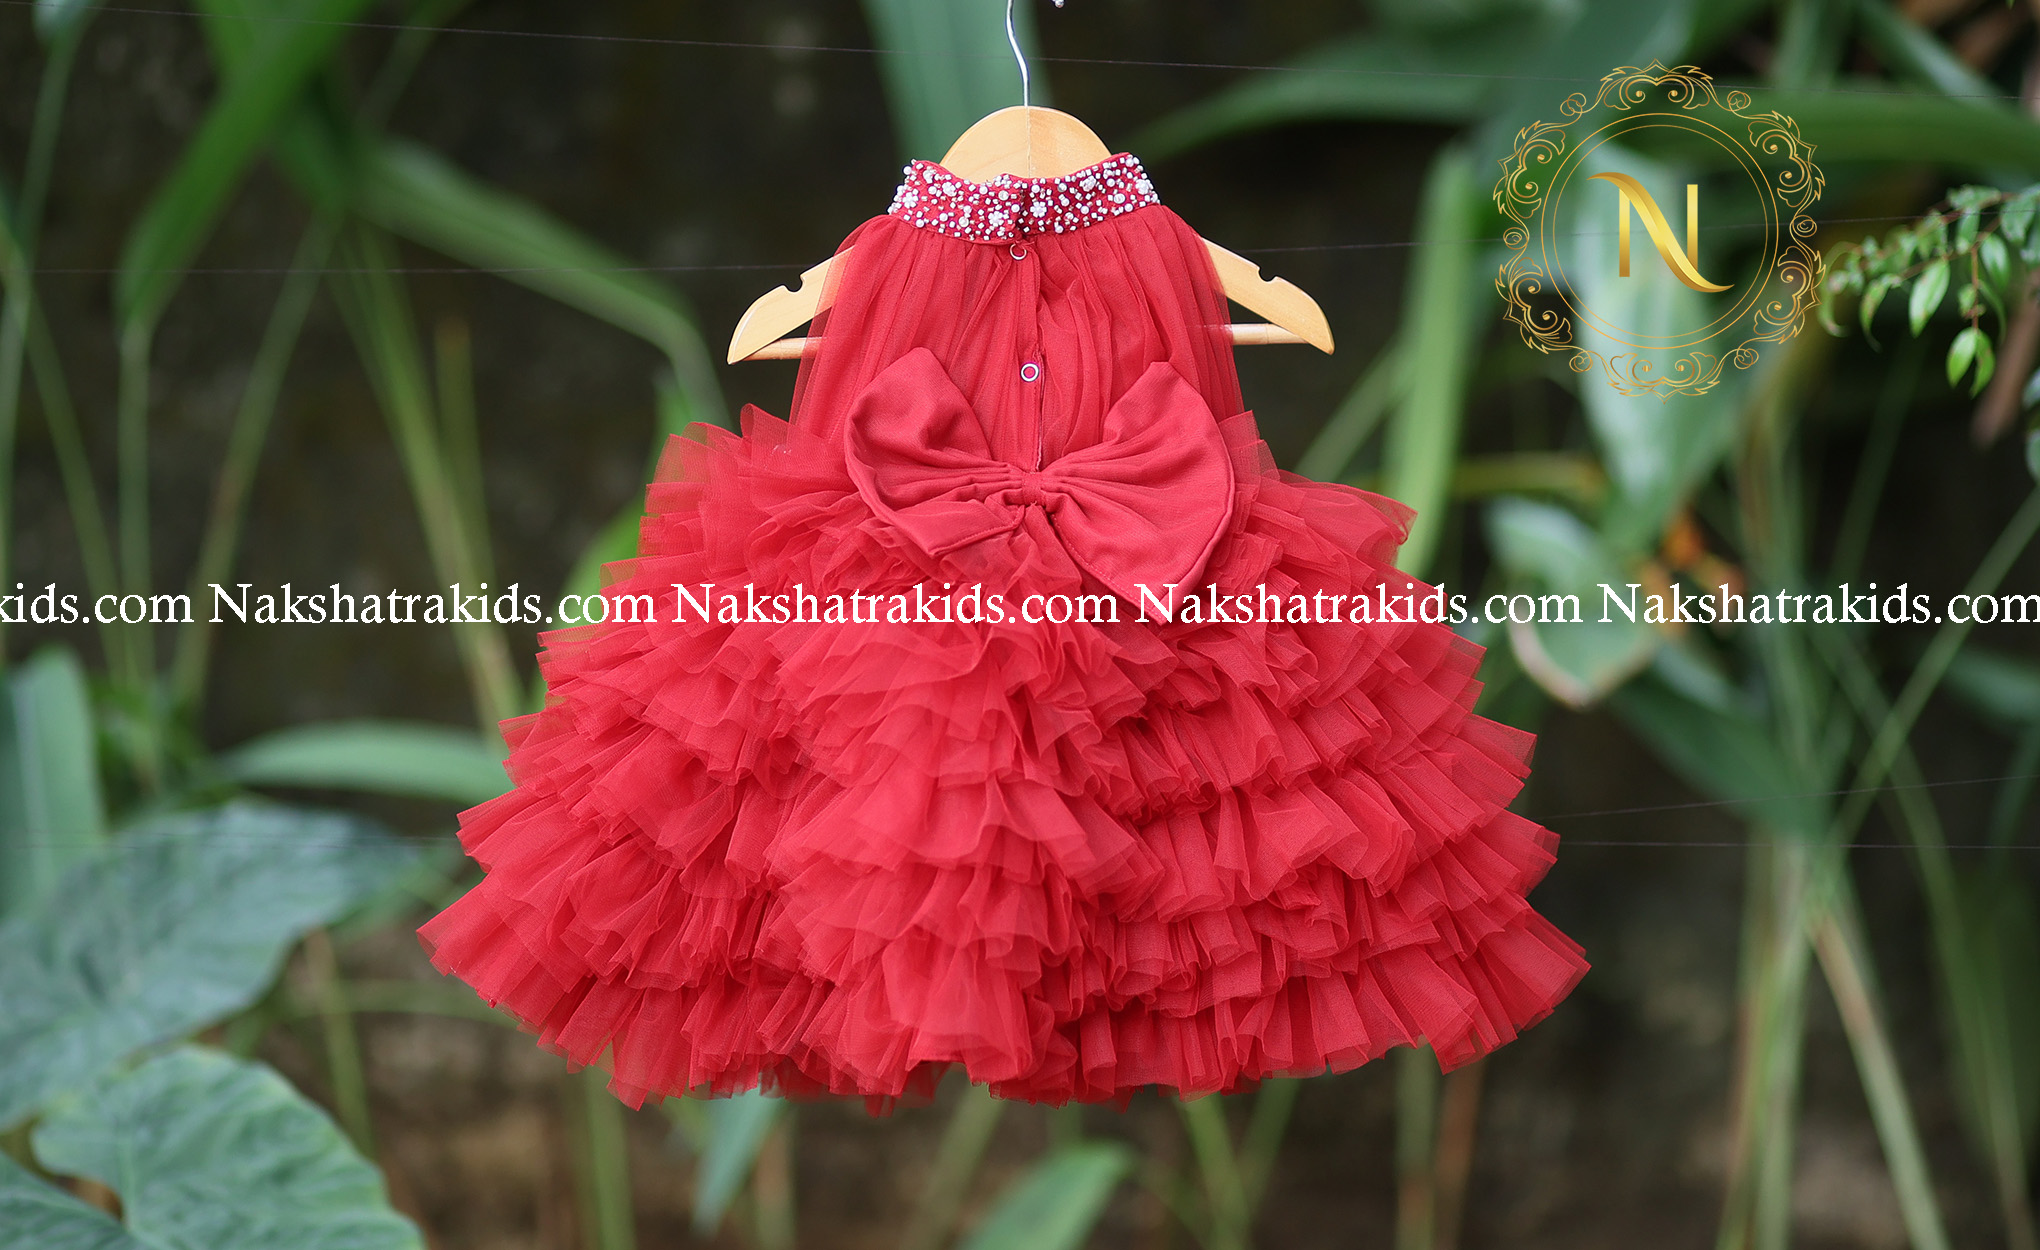 Frock design ideas  Tips for Cutting  stitching simple Frocks for kids   Sew Guide